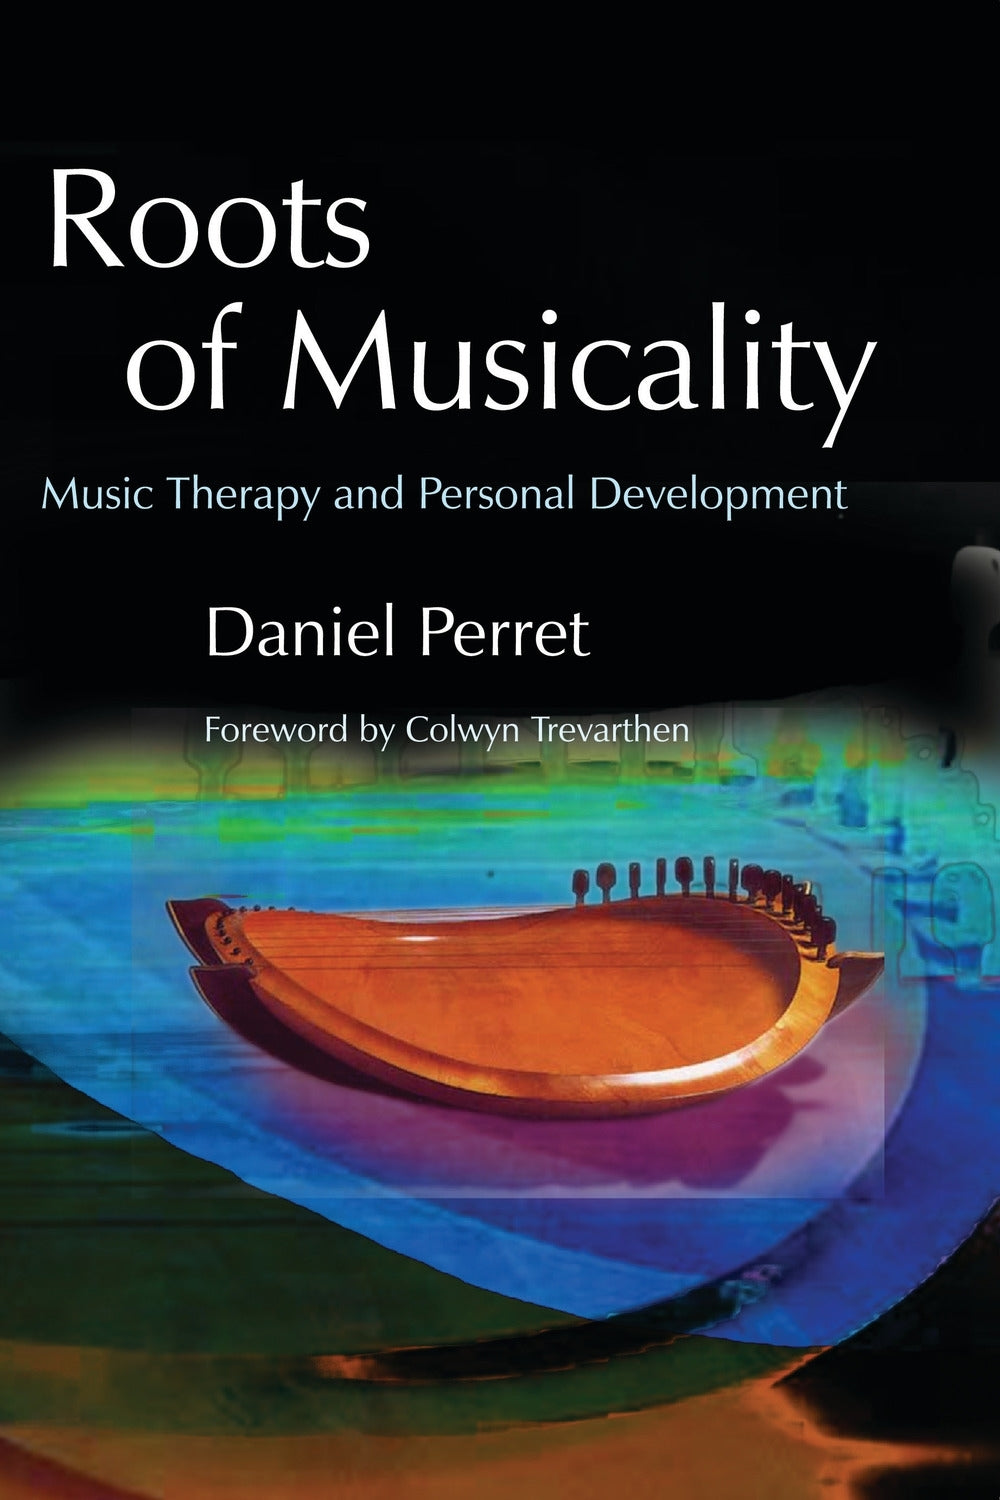 Roots of Musicality by Colwyn Trevarthen, Daniel Perret